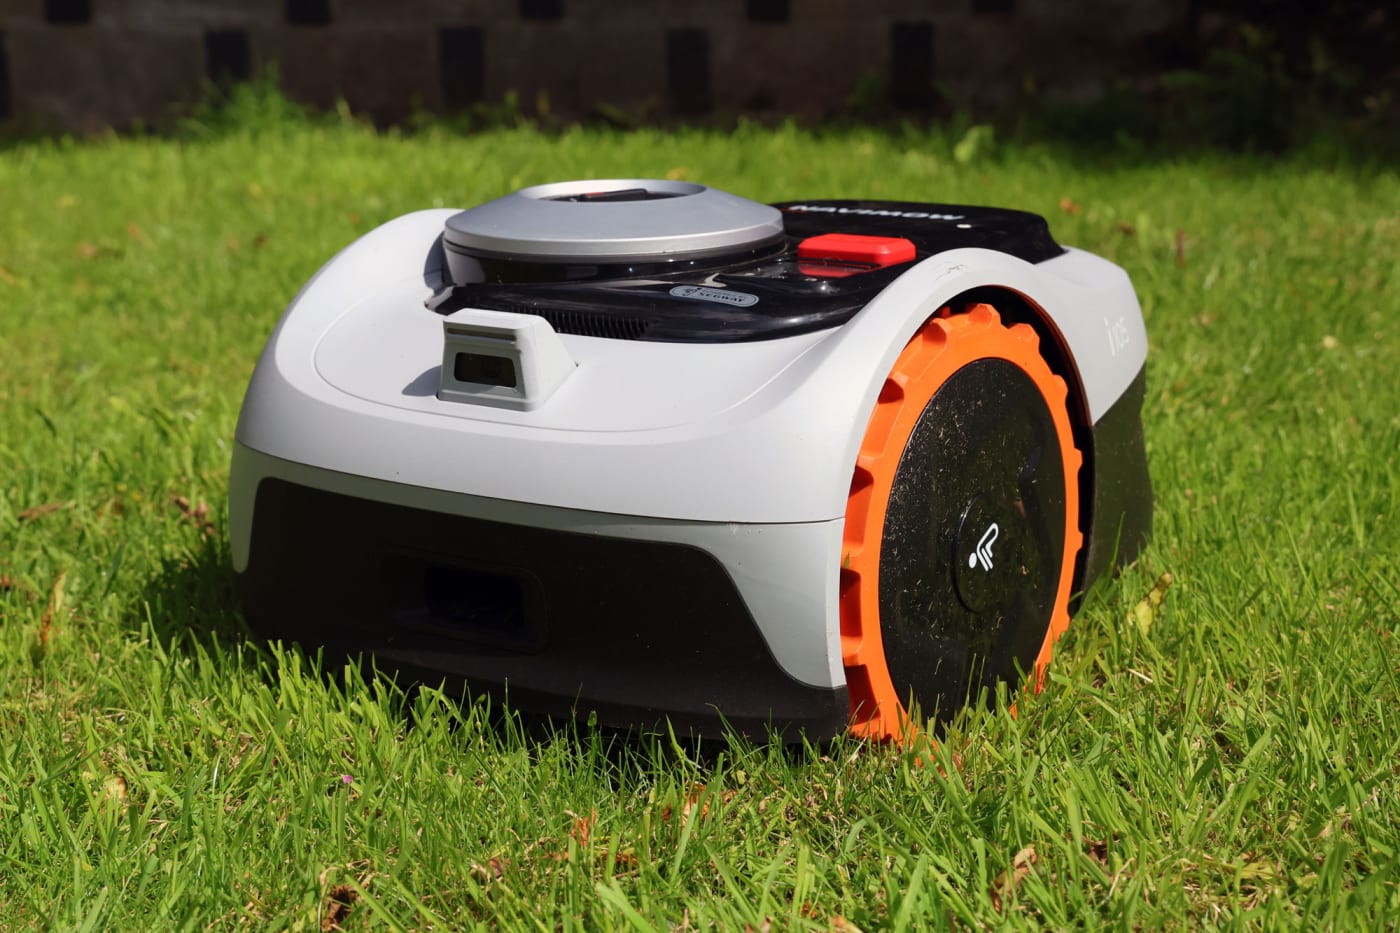 Segway's robot mower spared me from my least favorite chore